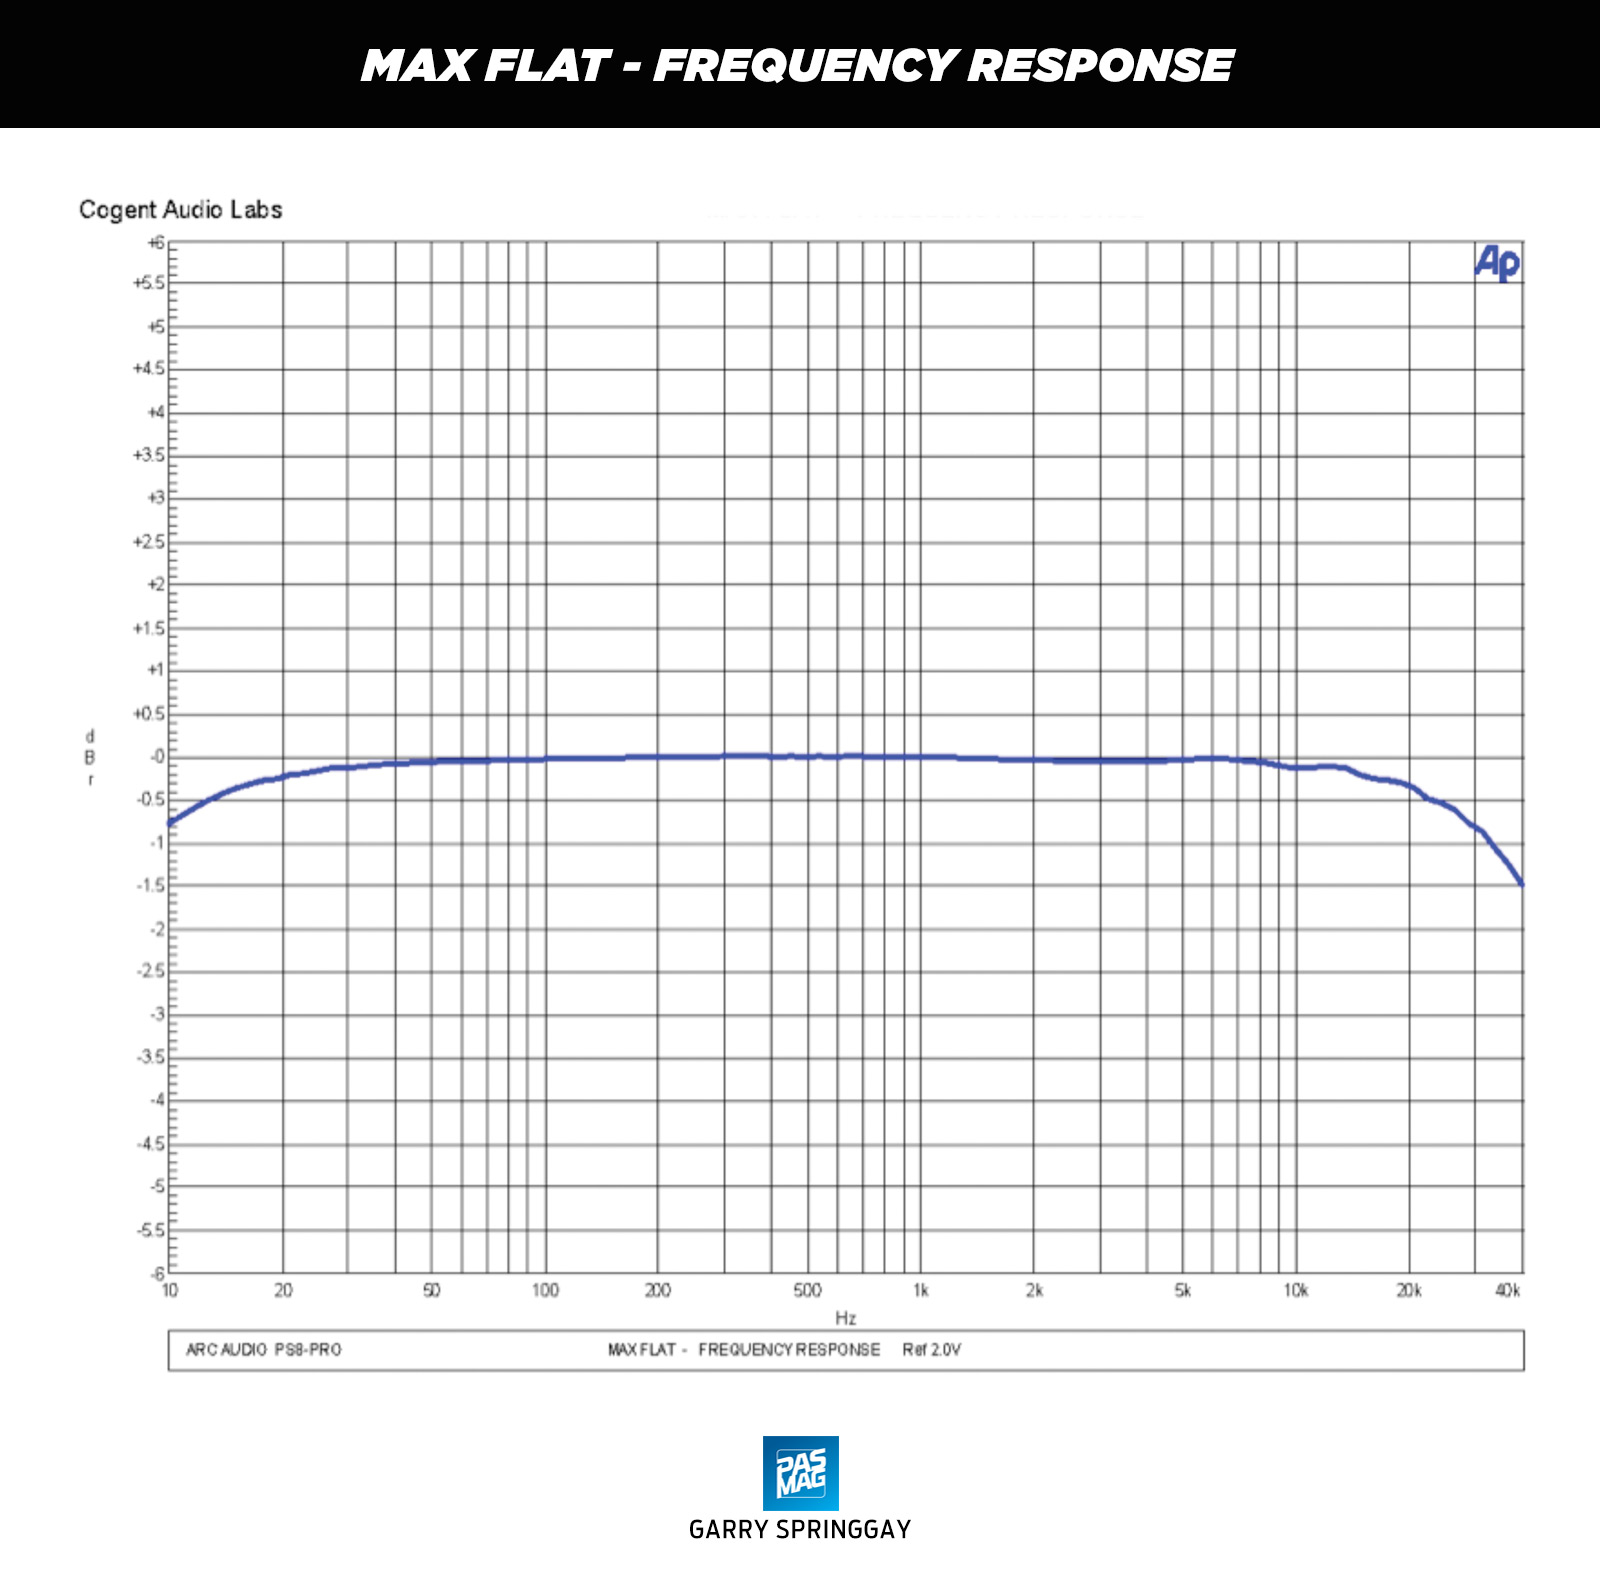 08 Arc Audio PS8 Pro Chart Max Flat Frequency Response